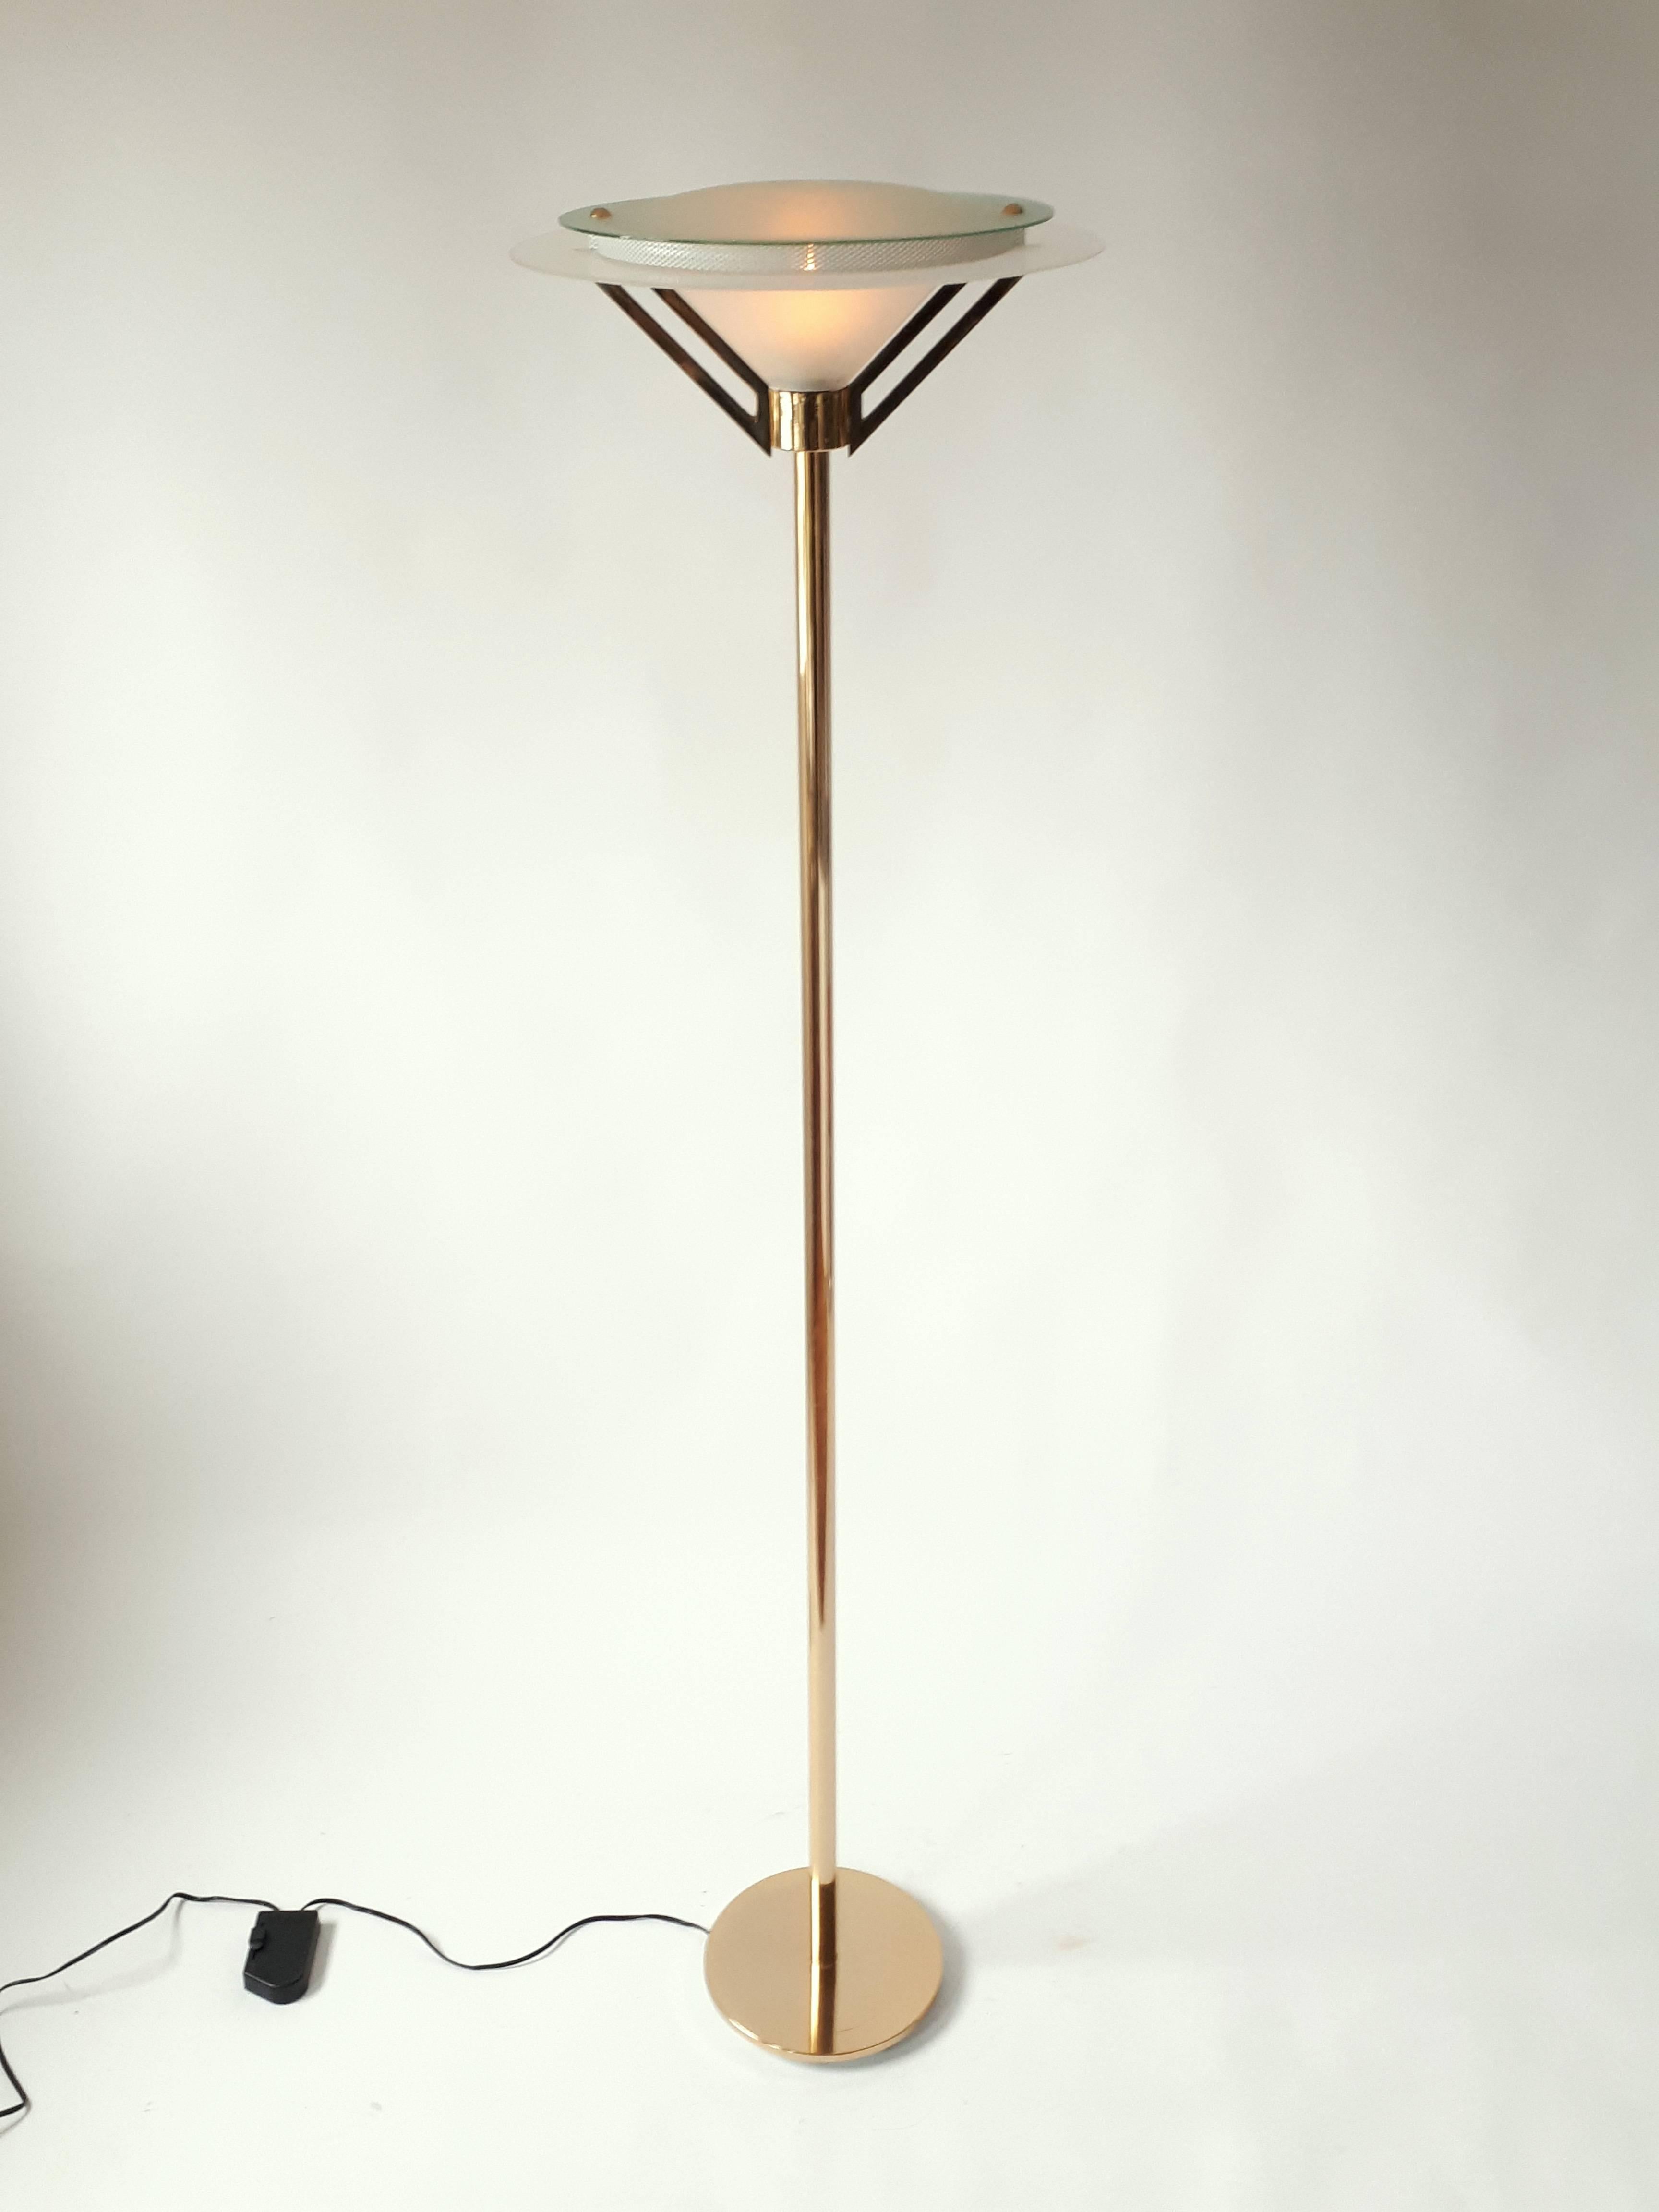 Well made with high quality material. 

Solid, sturdy construction. 

Measure 72 inches high. 

Contain one E26 size socket rated at 100 watts maximum. 

Foot dimmer on cord 

Matching table lamp available, see listing.